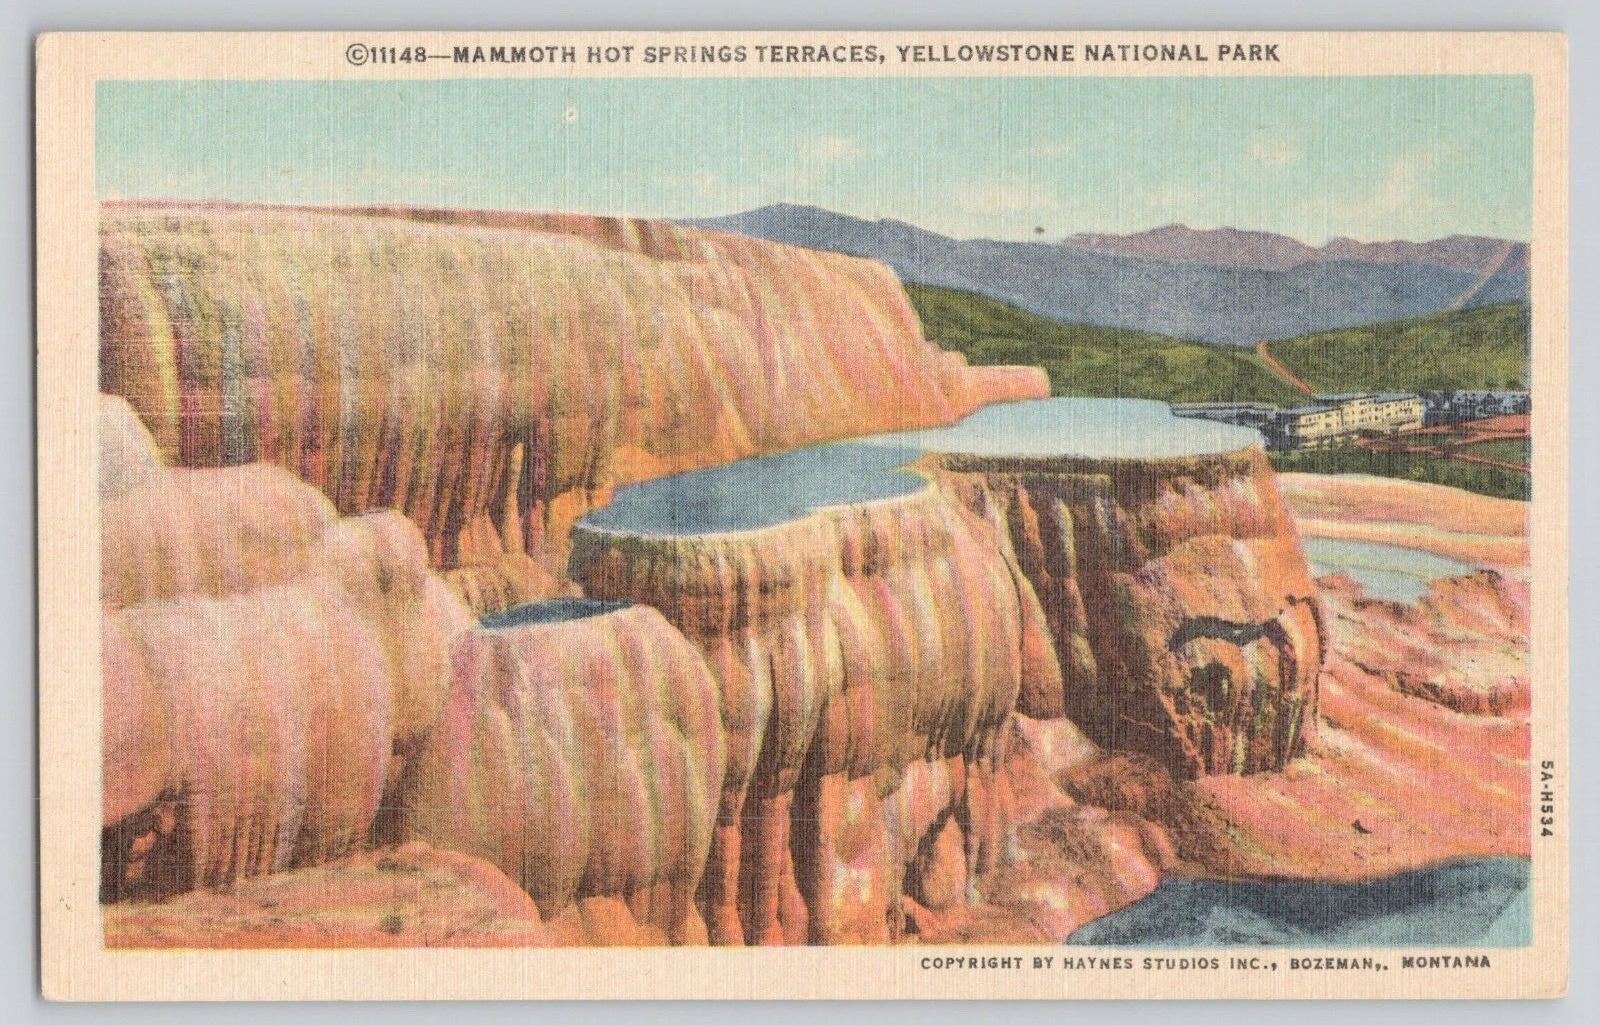 Postcard Mammoth Hot Springs Terraces, Yellowstone National Park